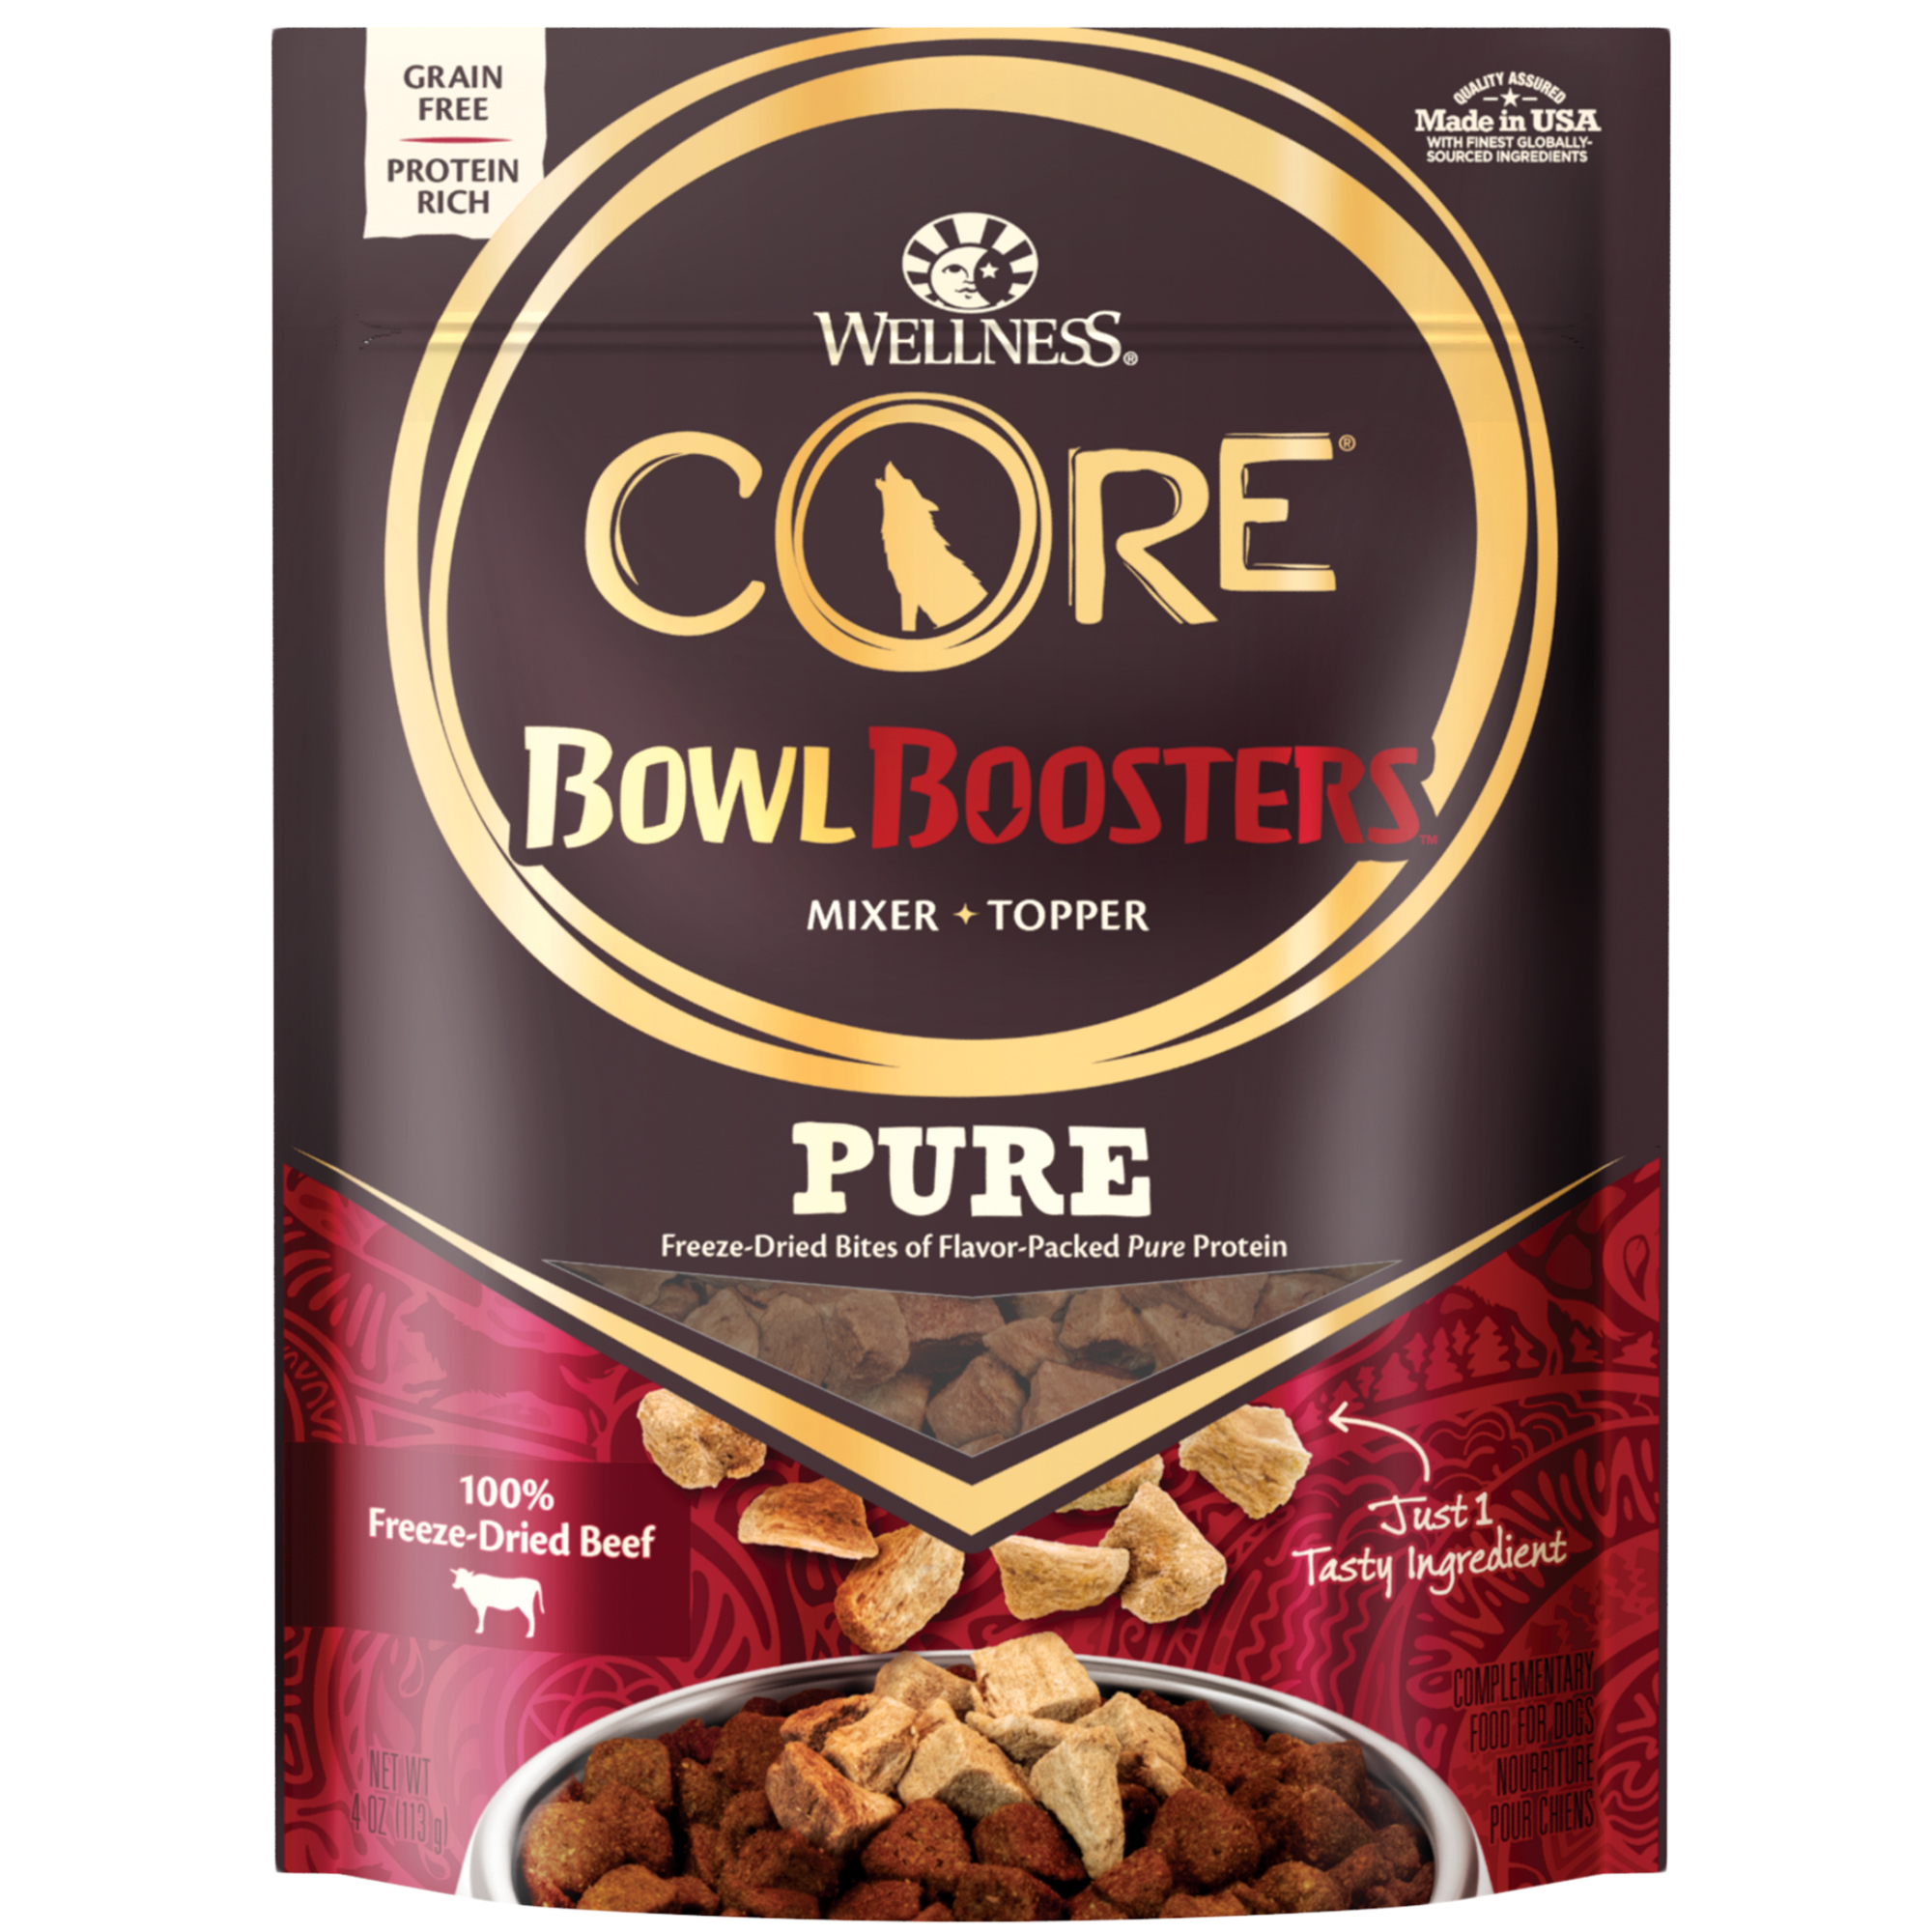 Wellness CORE Natural Bowl Boosters Bare Dog Food Mixer or Topper, Freeze Dried Beef, 4-Ounce Bag - image 1 of 8